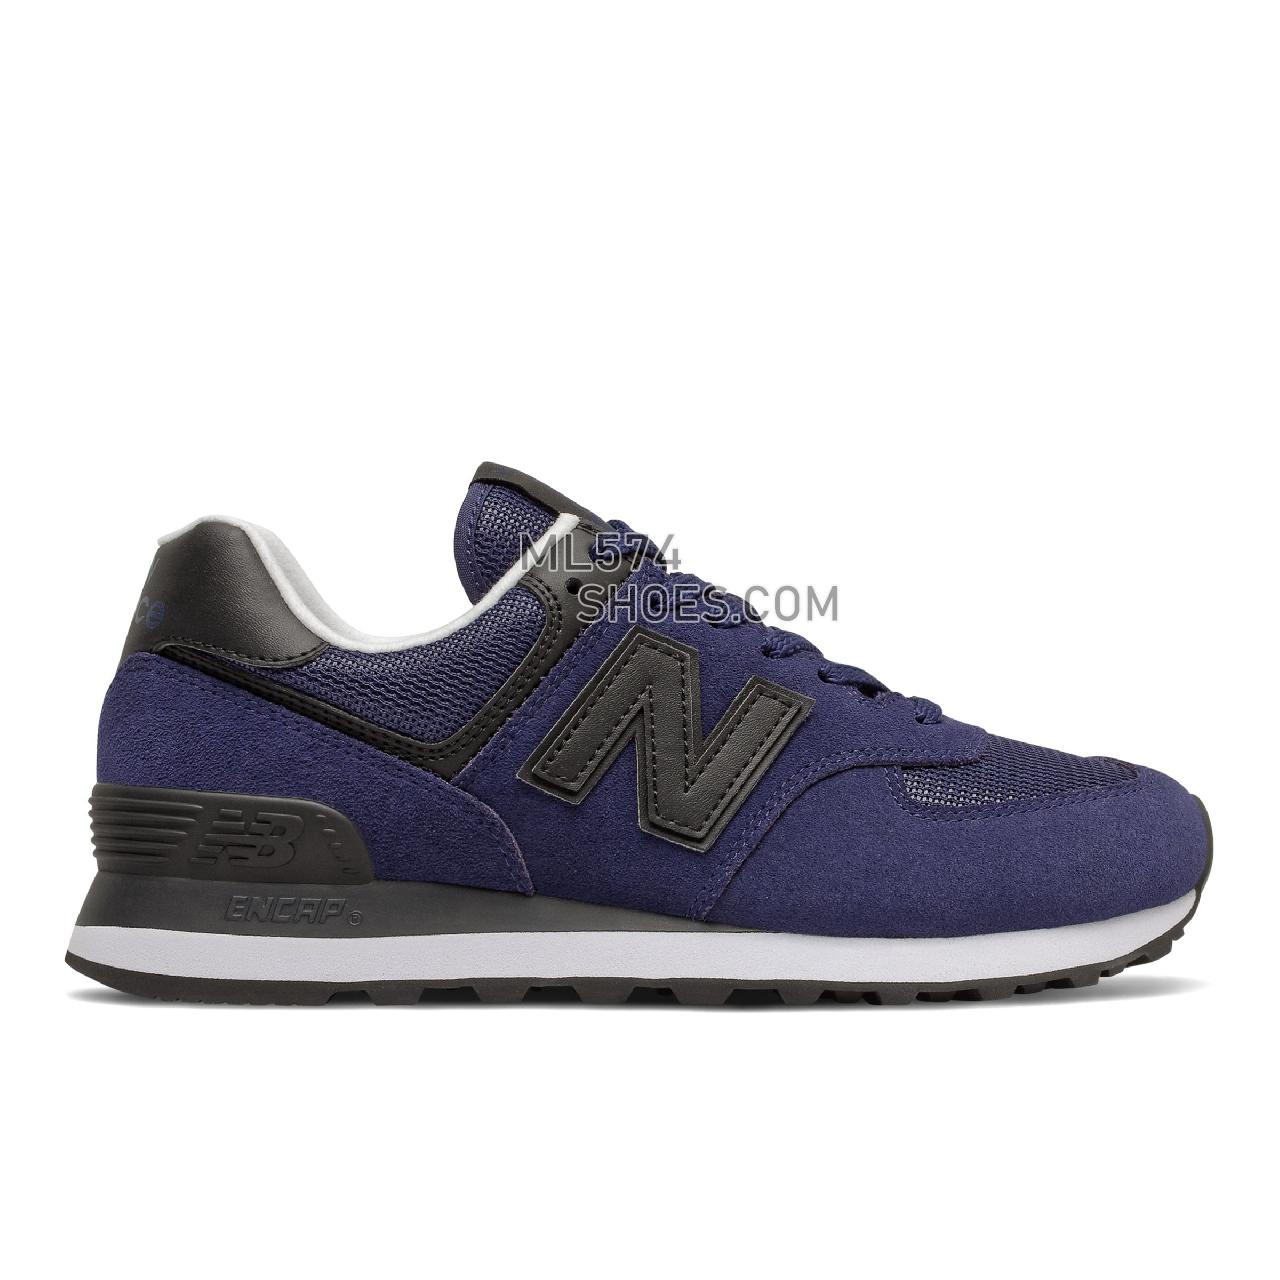 New Balance 574 - Women's Classic Sneakers - Night Tide with Black - WL574MB2